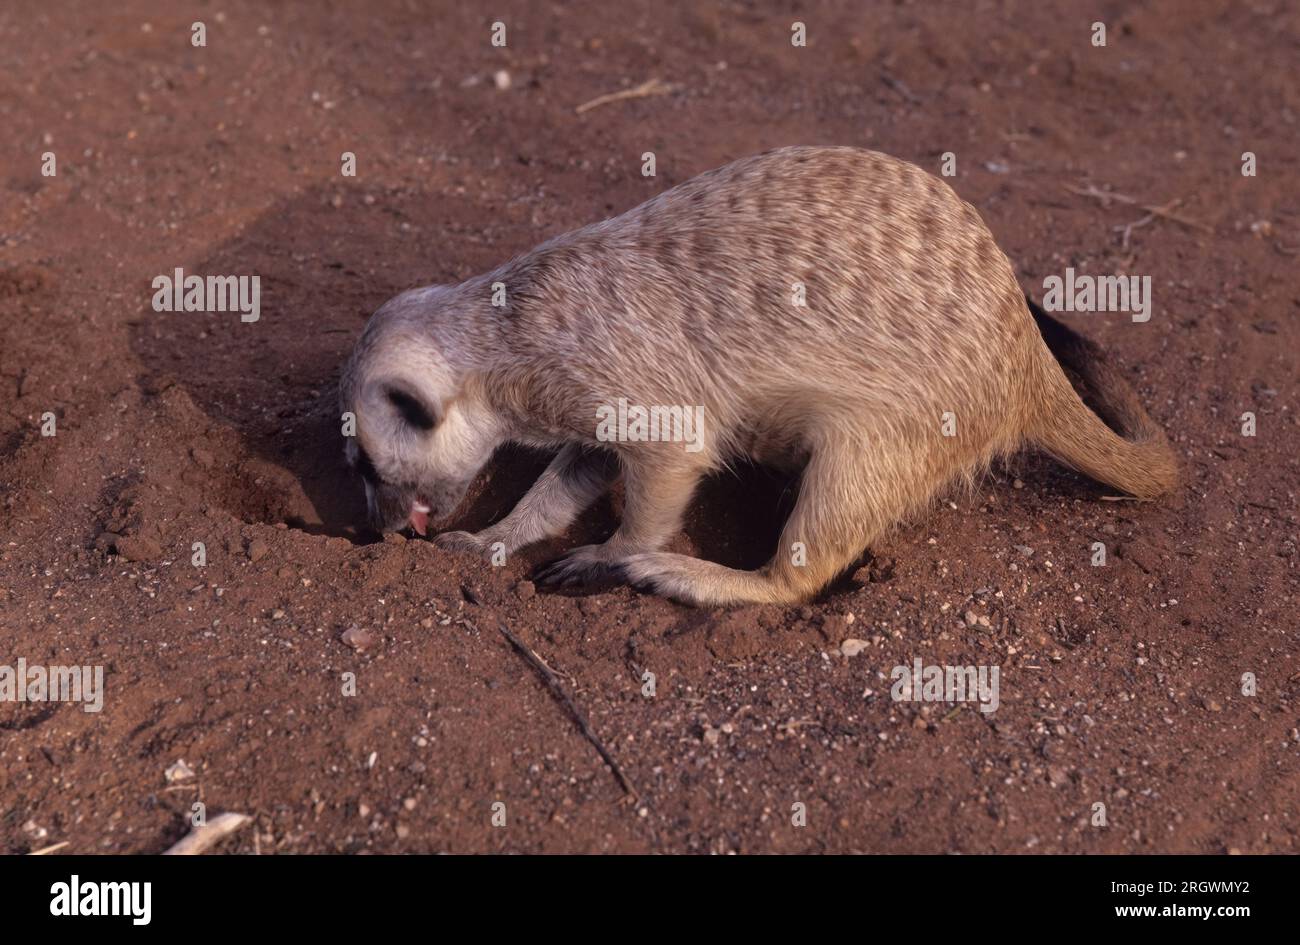 The meerkat (Suricata suricatta) or suricate is a small mongoose found in southern Africa. Stock Photo